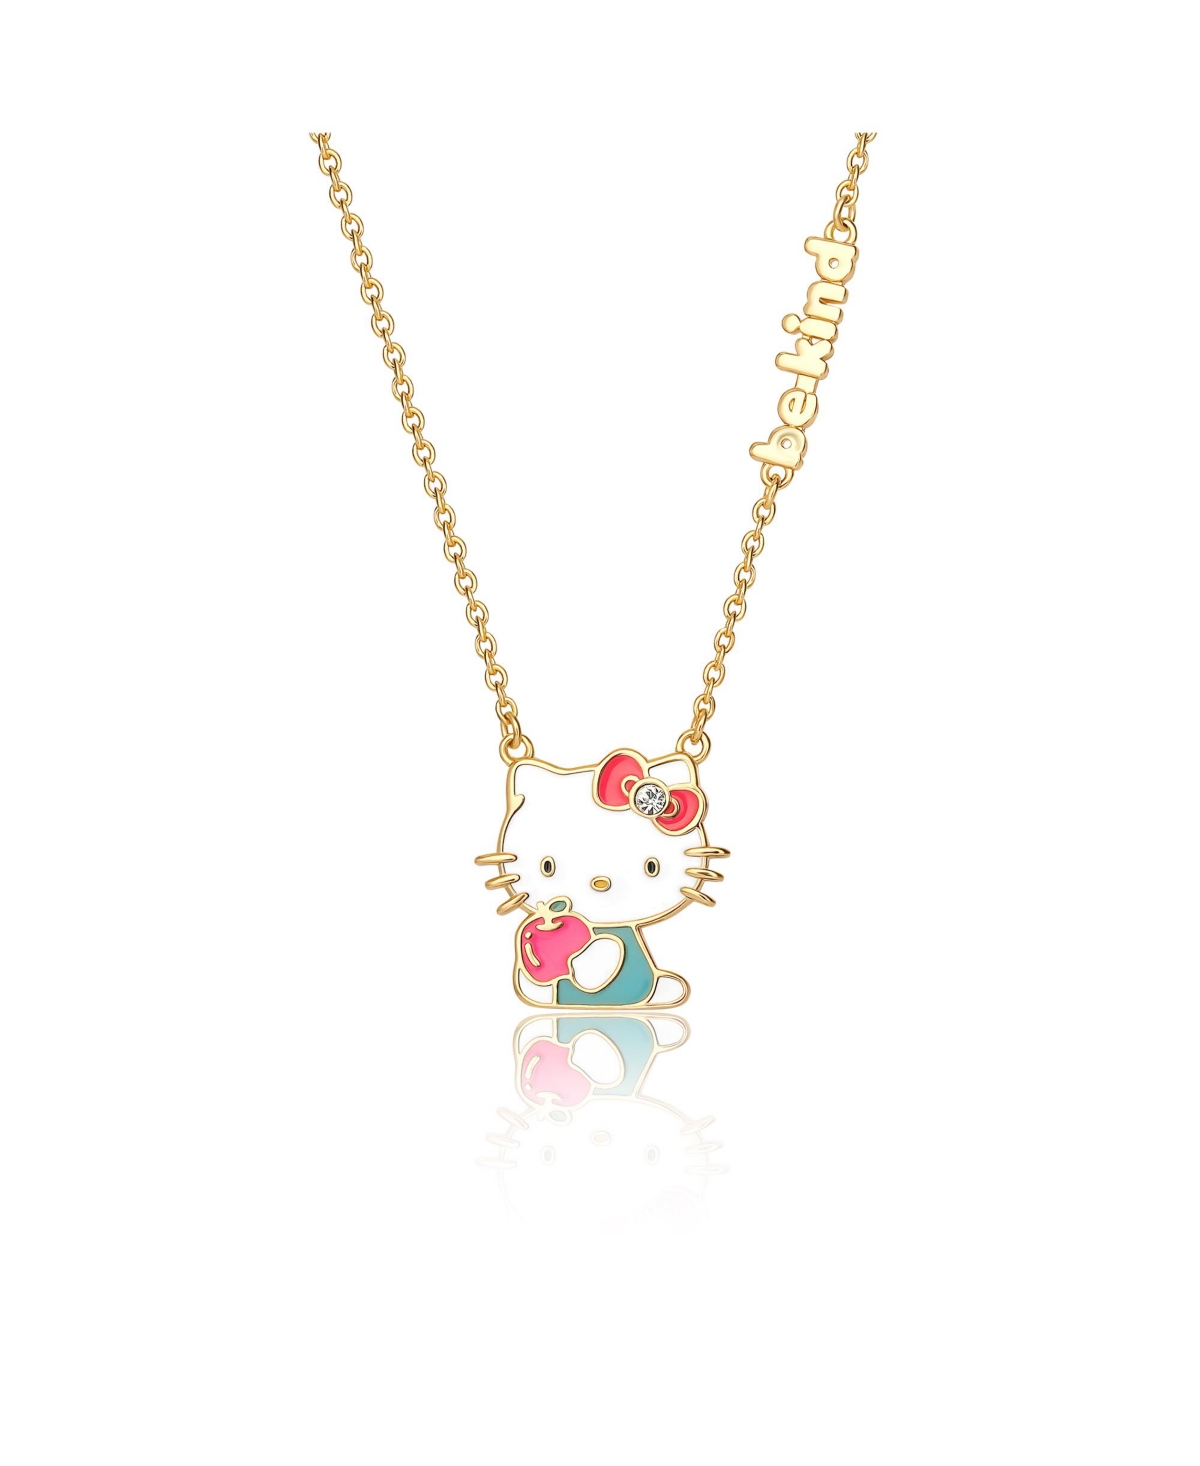 Sanrio Crystal "Be Kind" Apple Necklace - 18'' Chain - Gold tone, white, pink